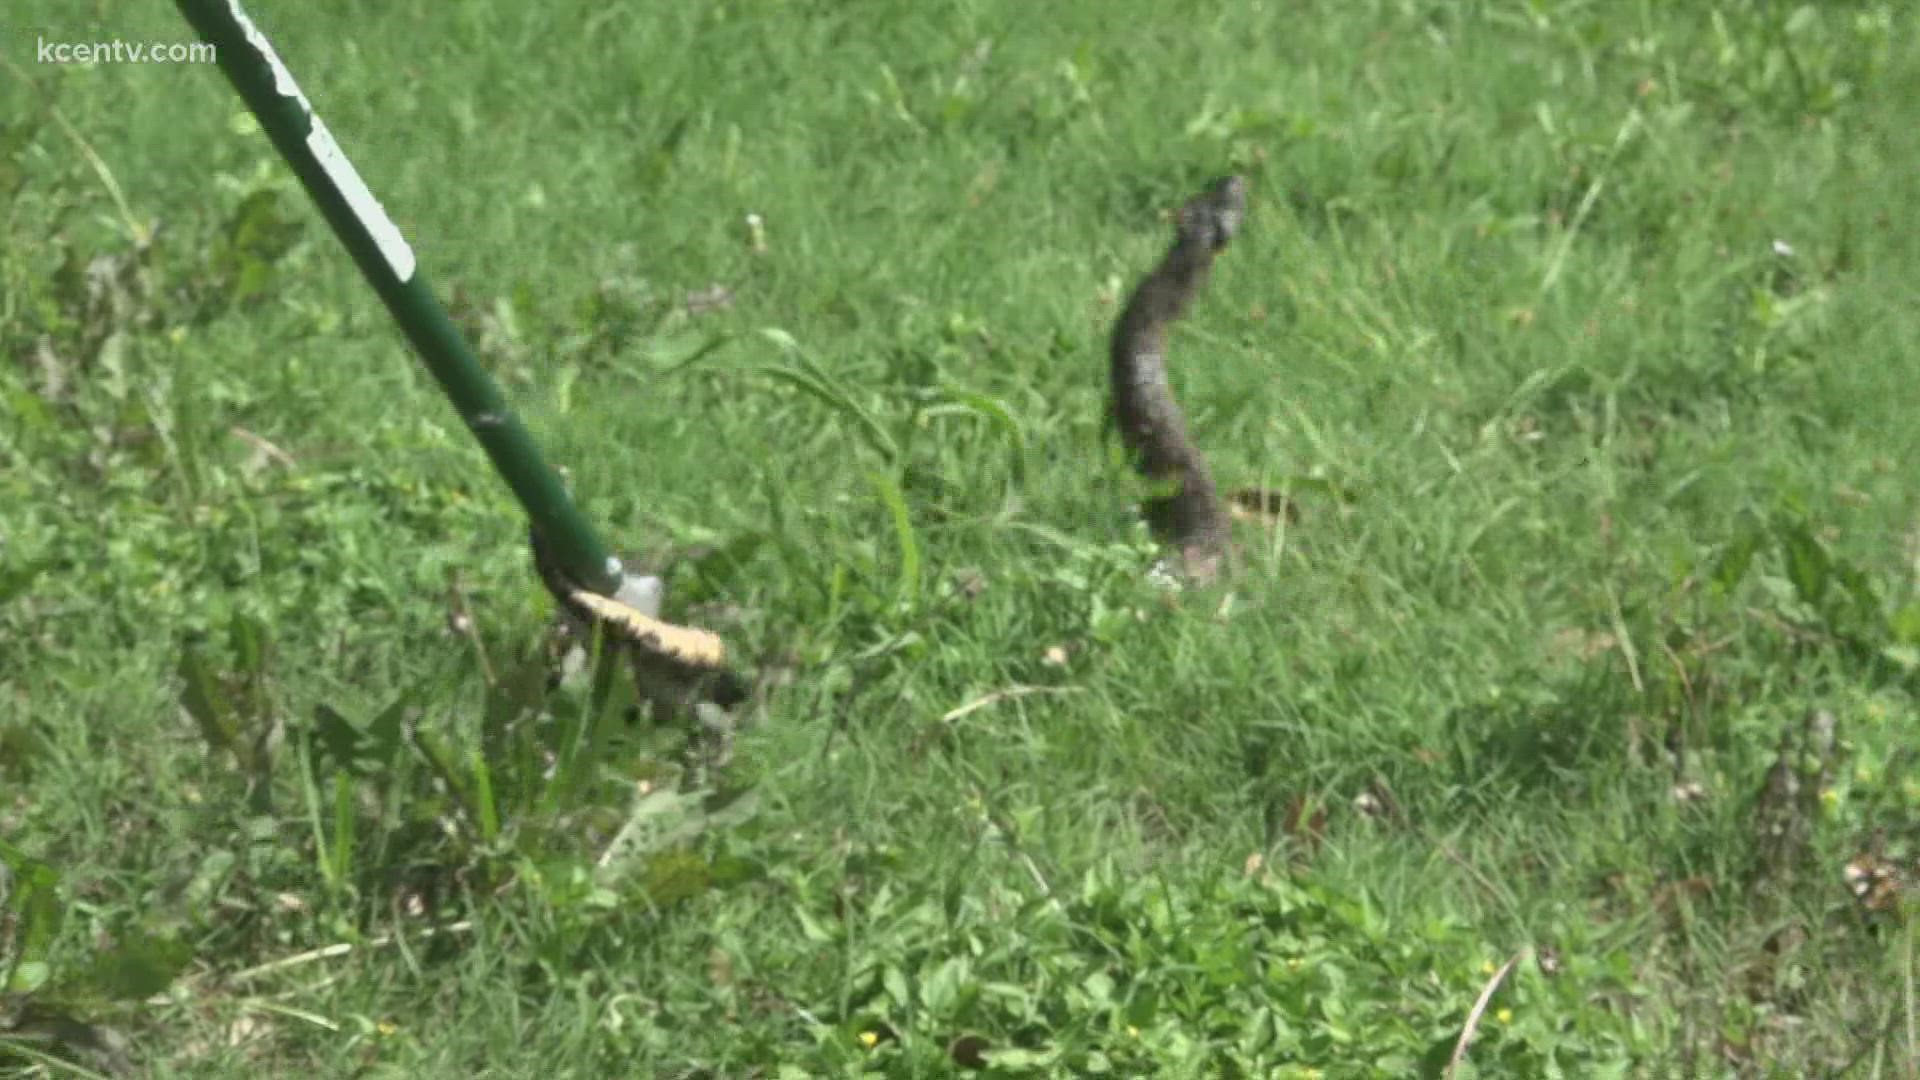 Summertime means it's snake season and snake control expert Casey Dawson says they're already getting active.